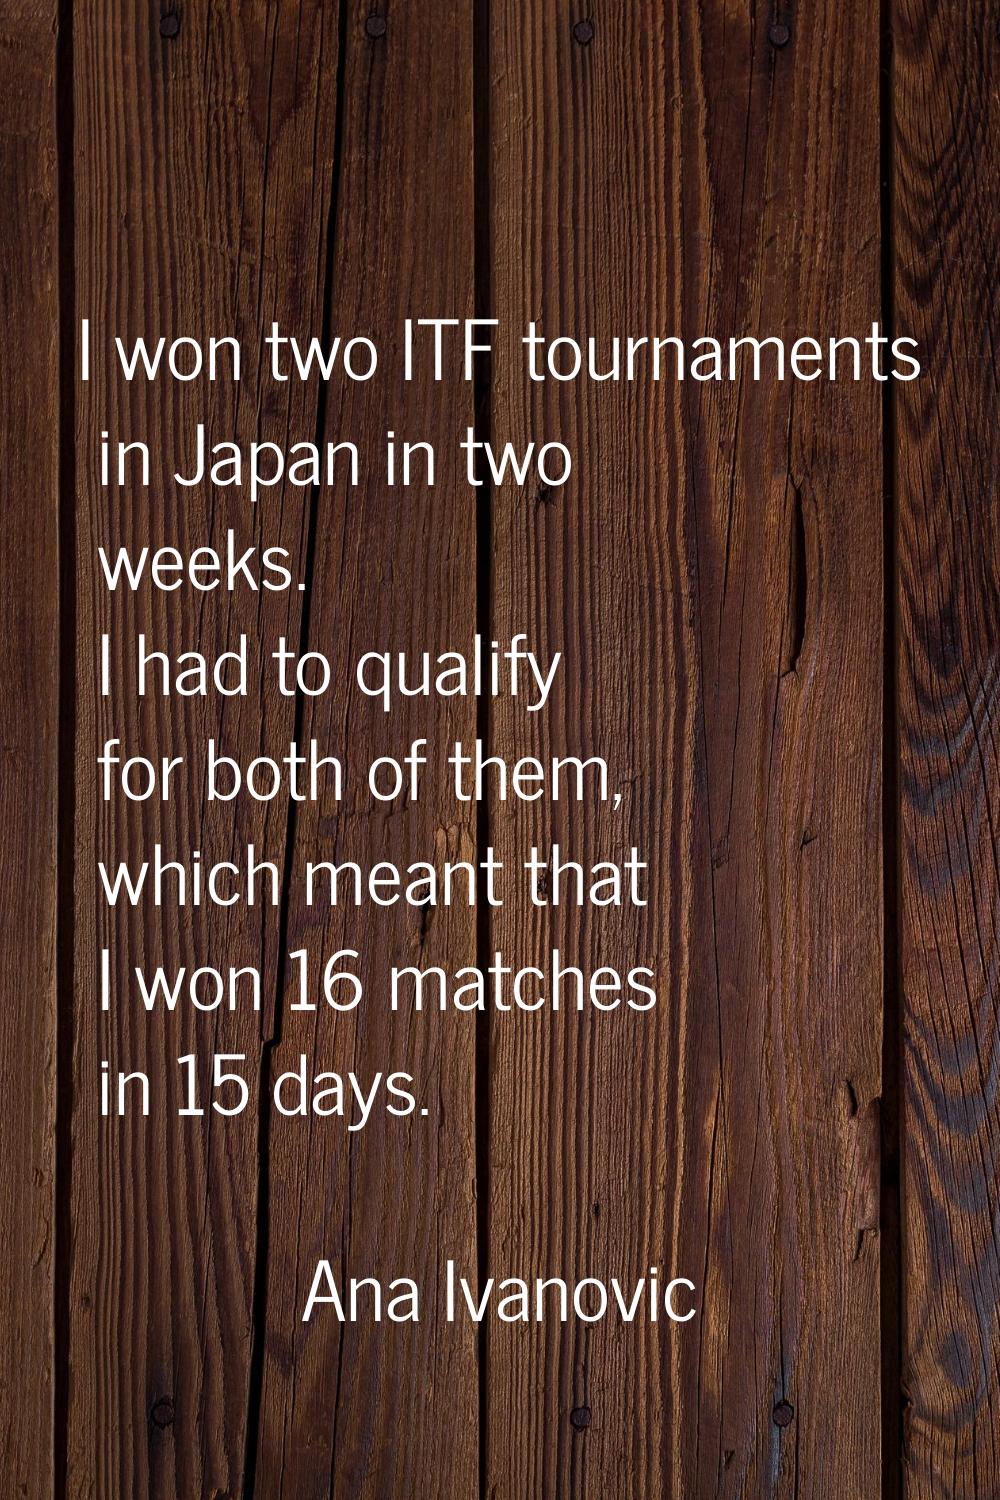 I won two ITF tournaments in Japan in two weeks. I had to qualify for both of them, which meant tha